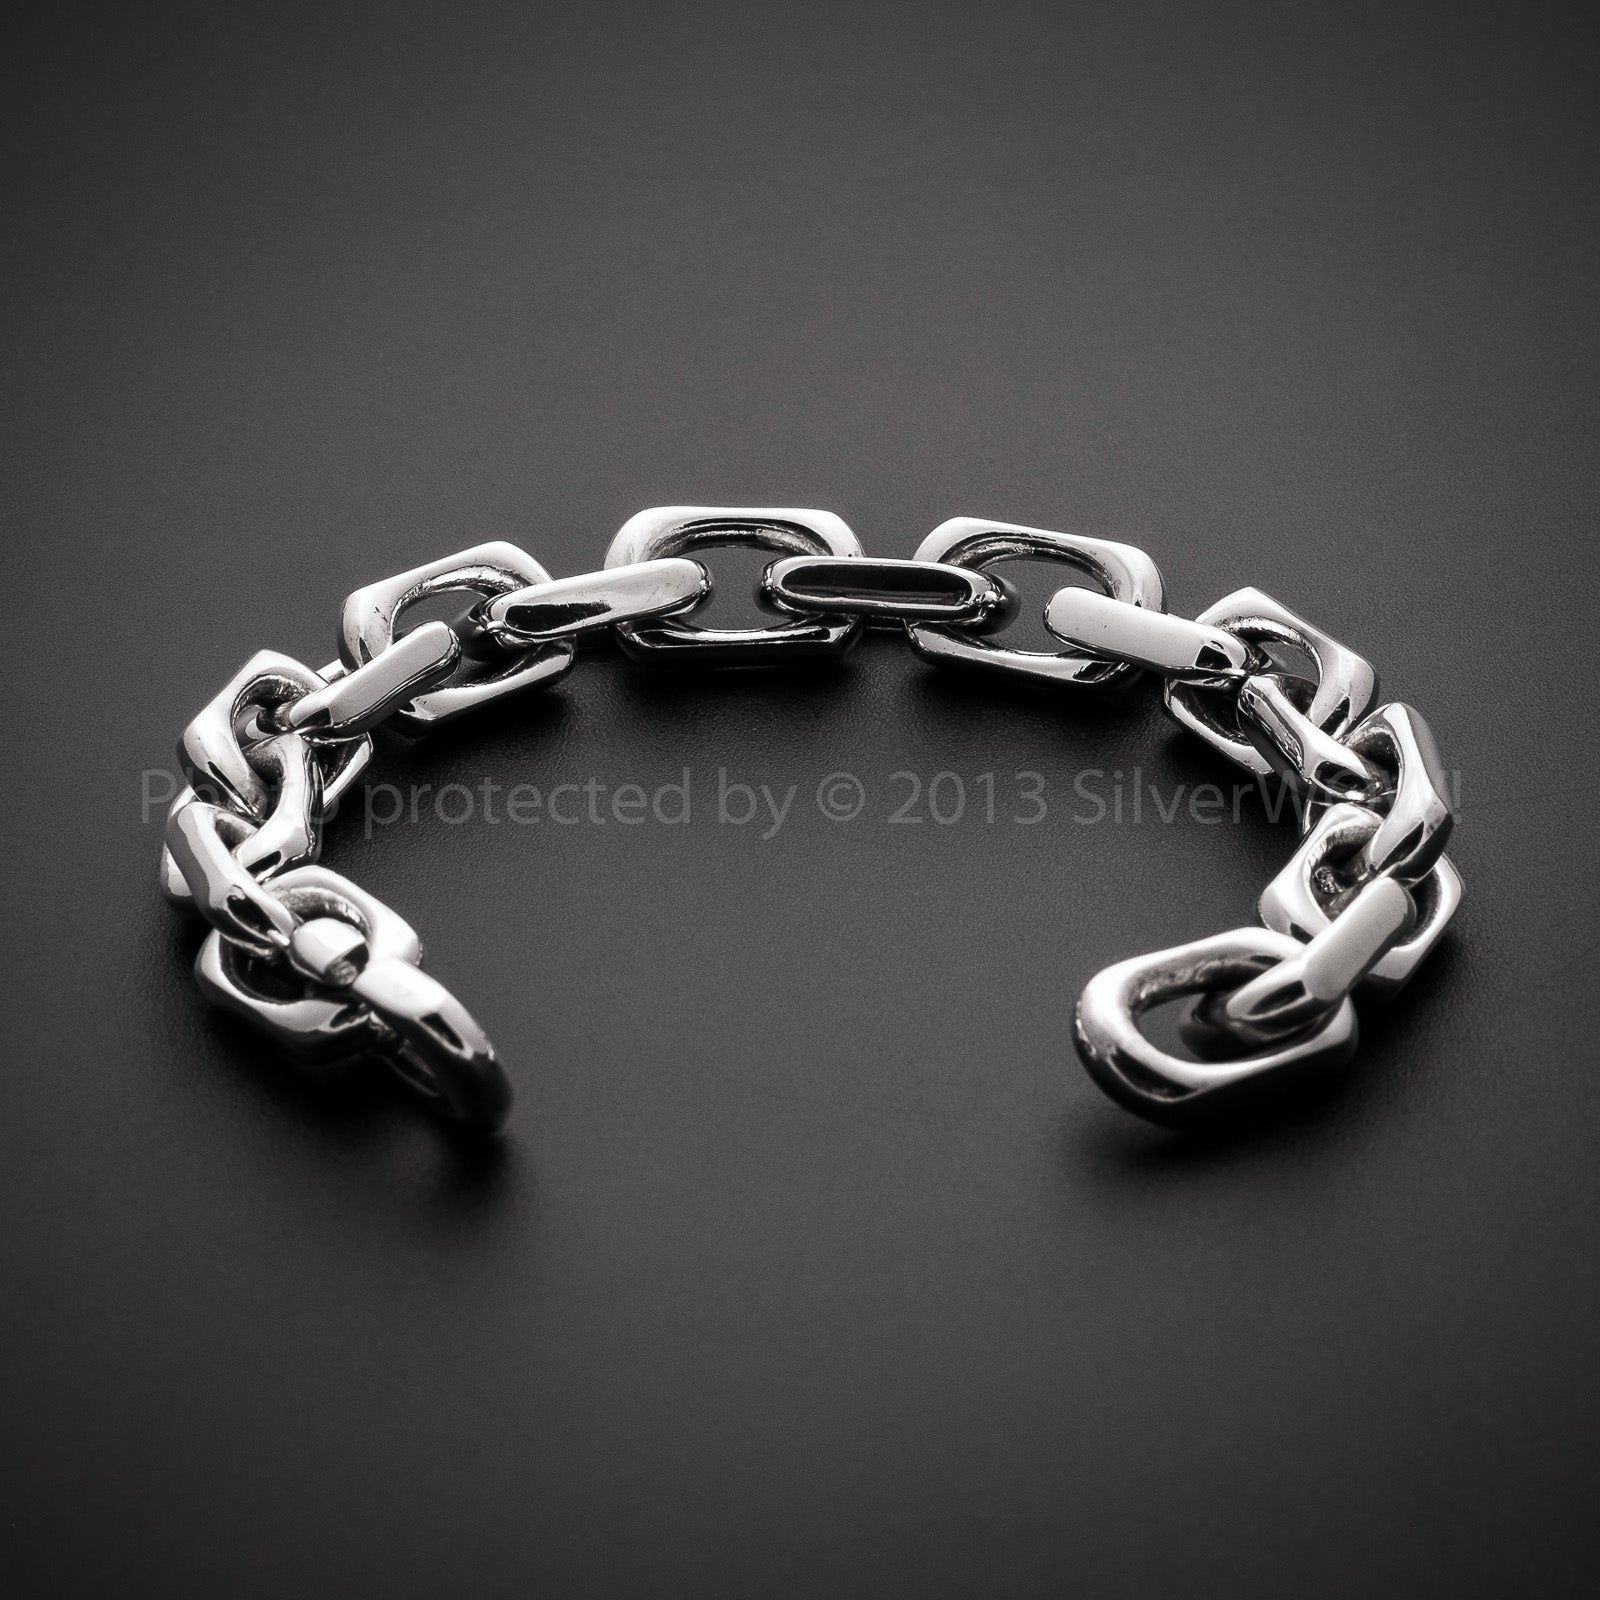 12mm Thick Mens Chain Link Silver Bracelet Side